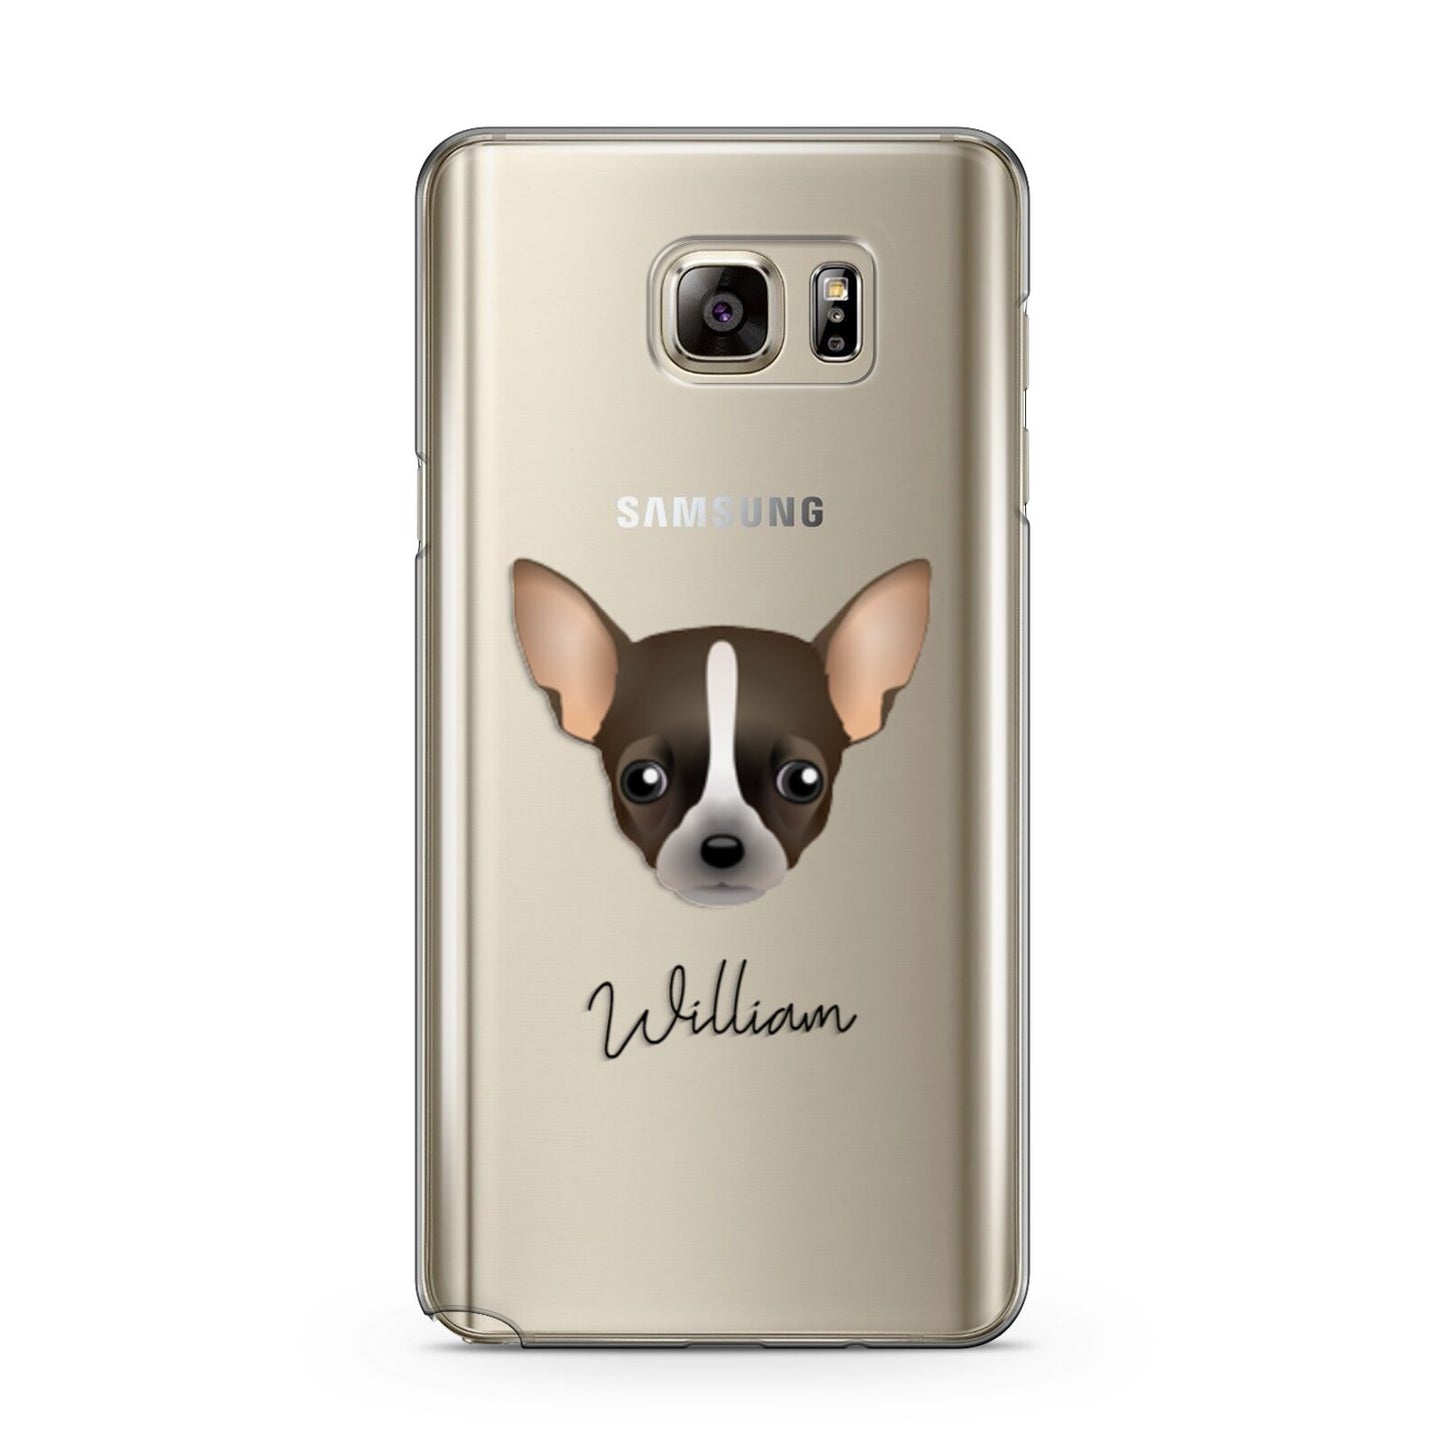 Chihuahua Personalised Samsung Galaxy Note 5 Case